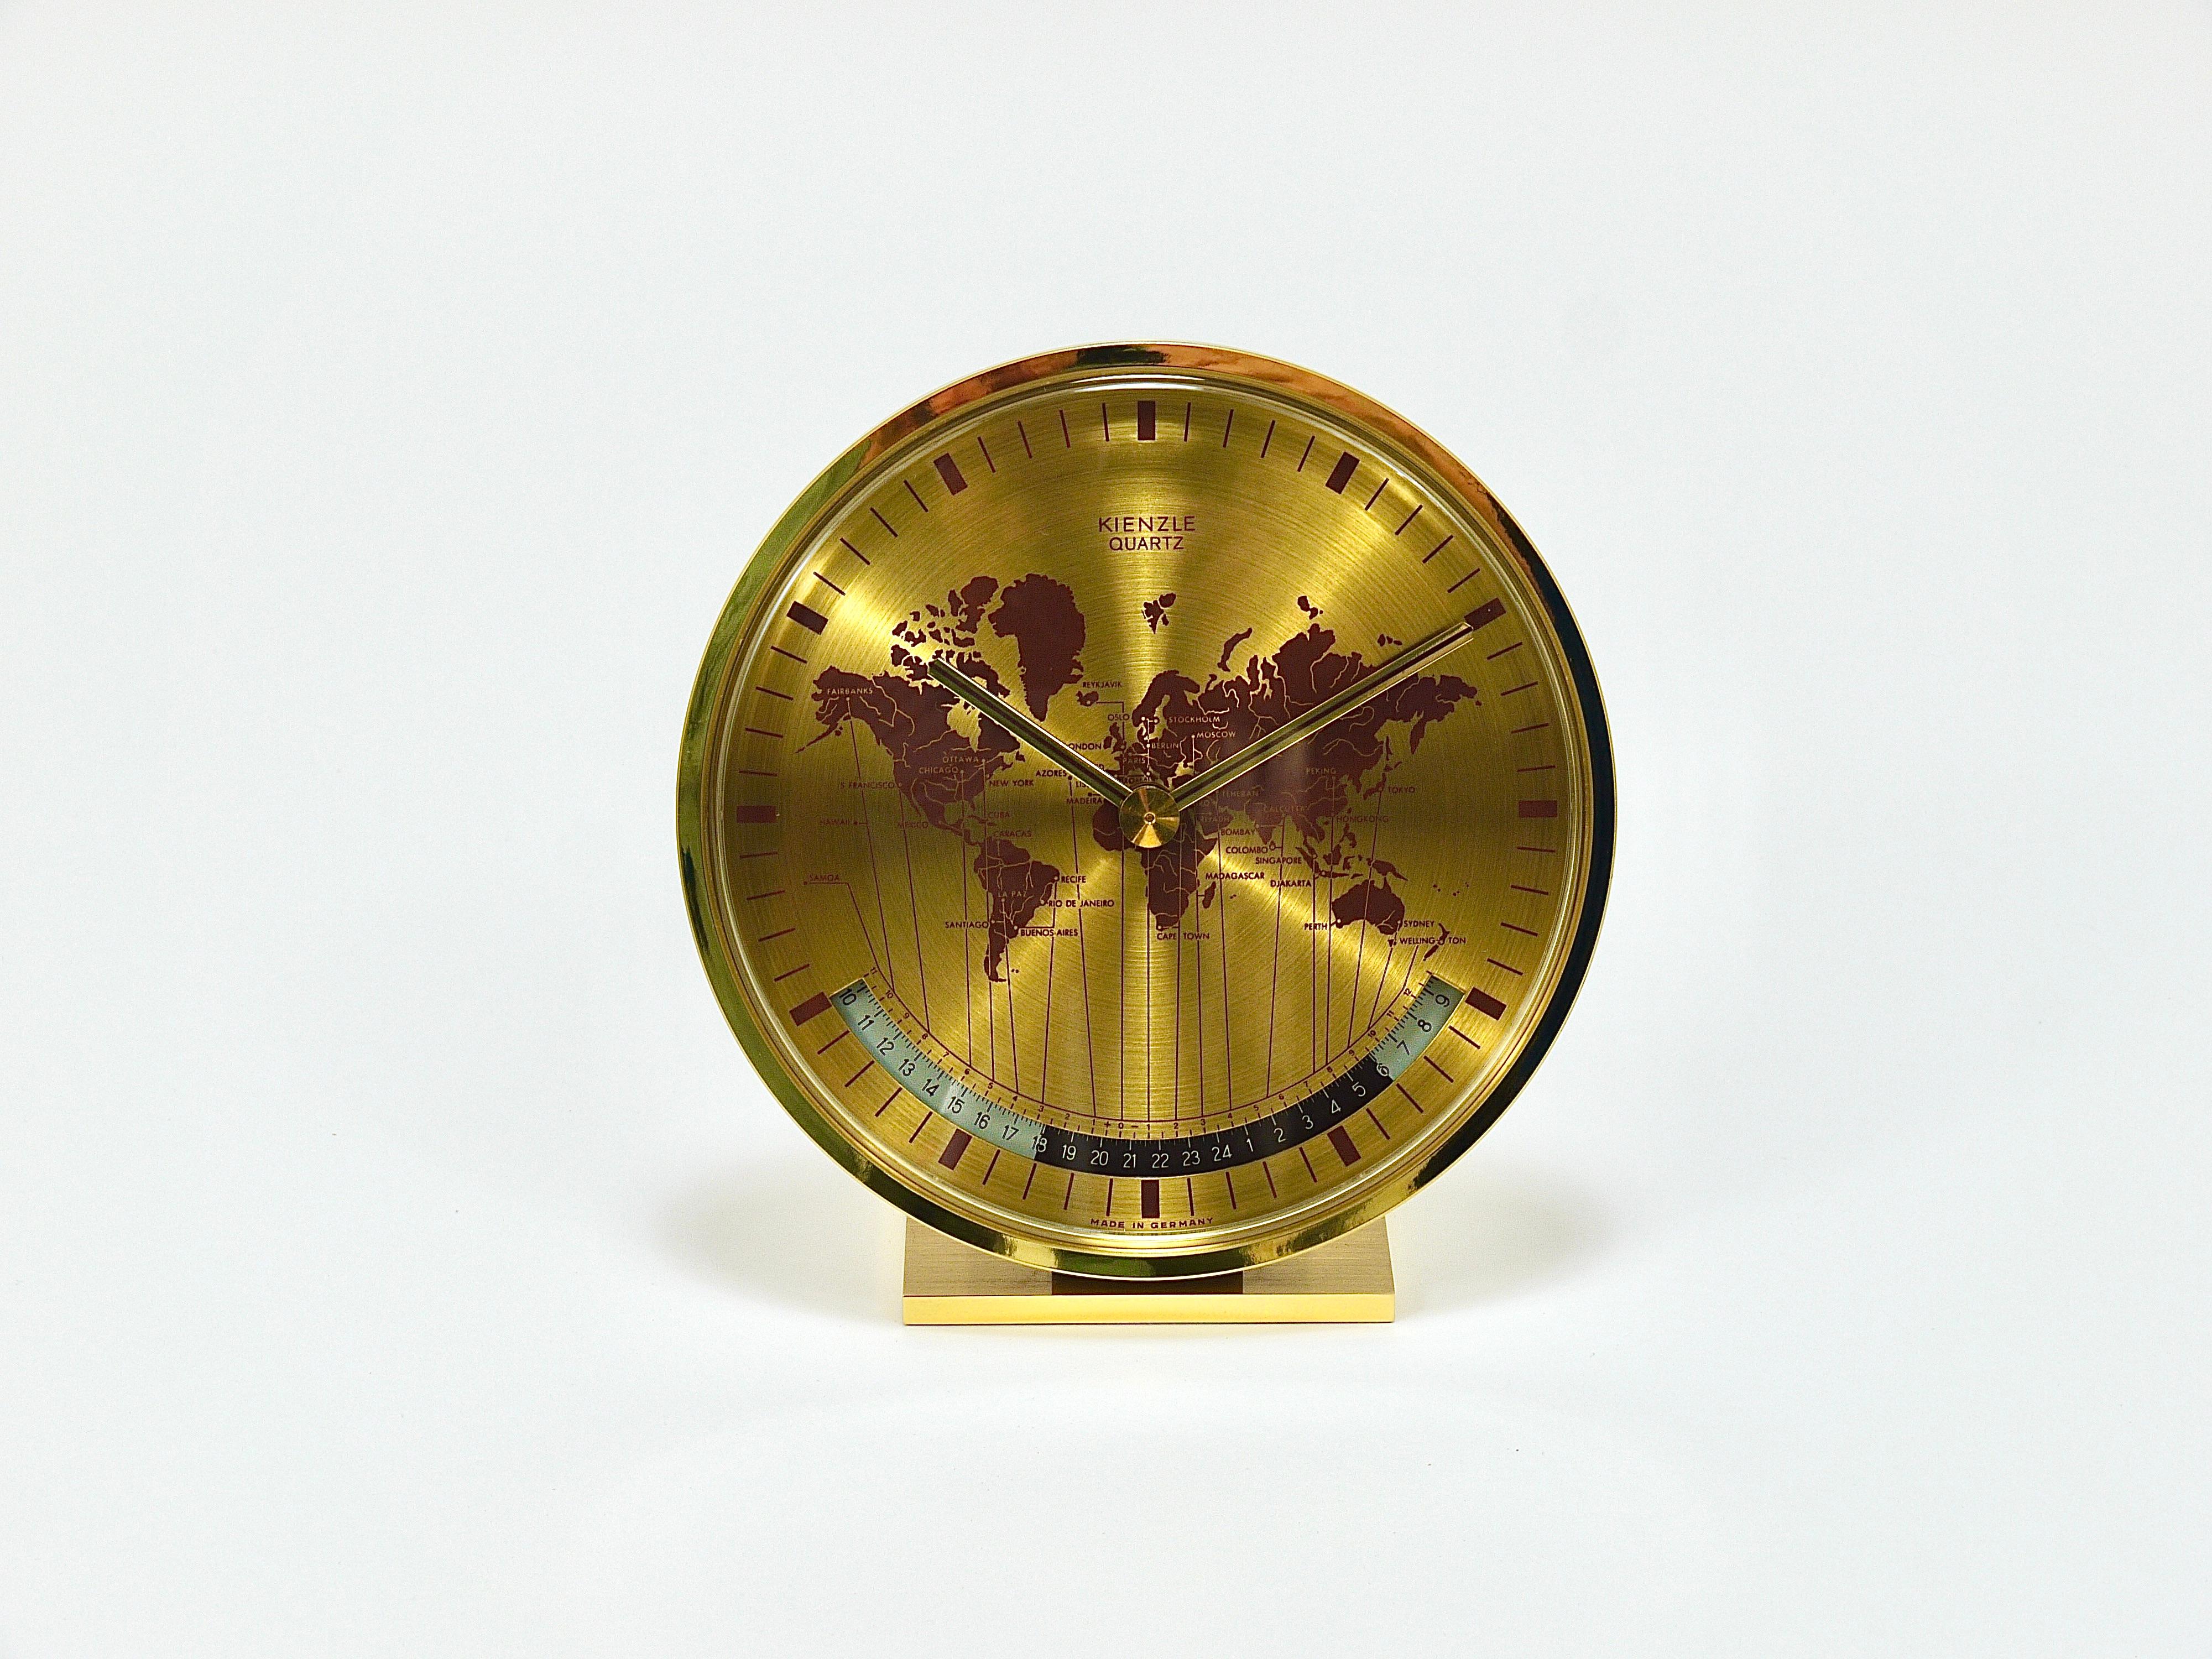 Kienzle GMT World Time Zone Brass Table Clock, Midcentury, Germany, 1960s For Sale 5